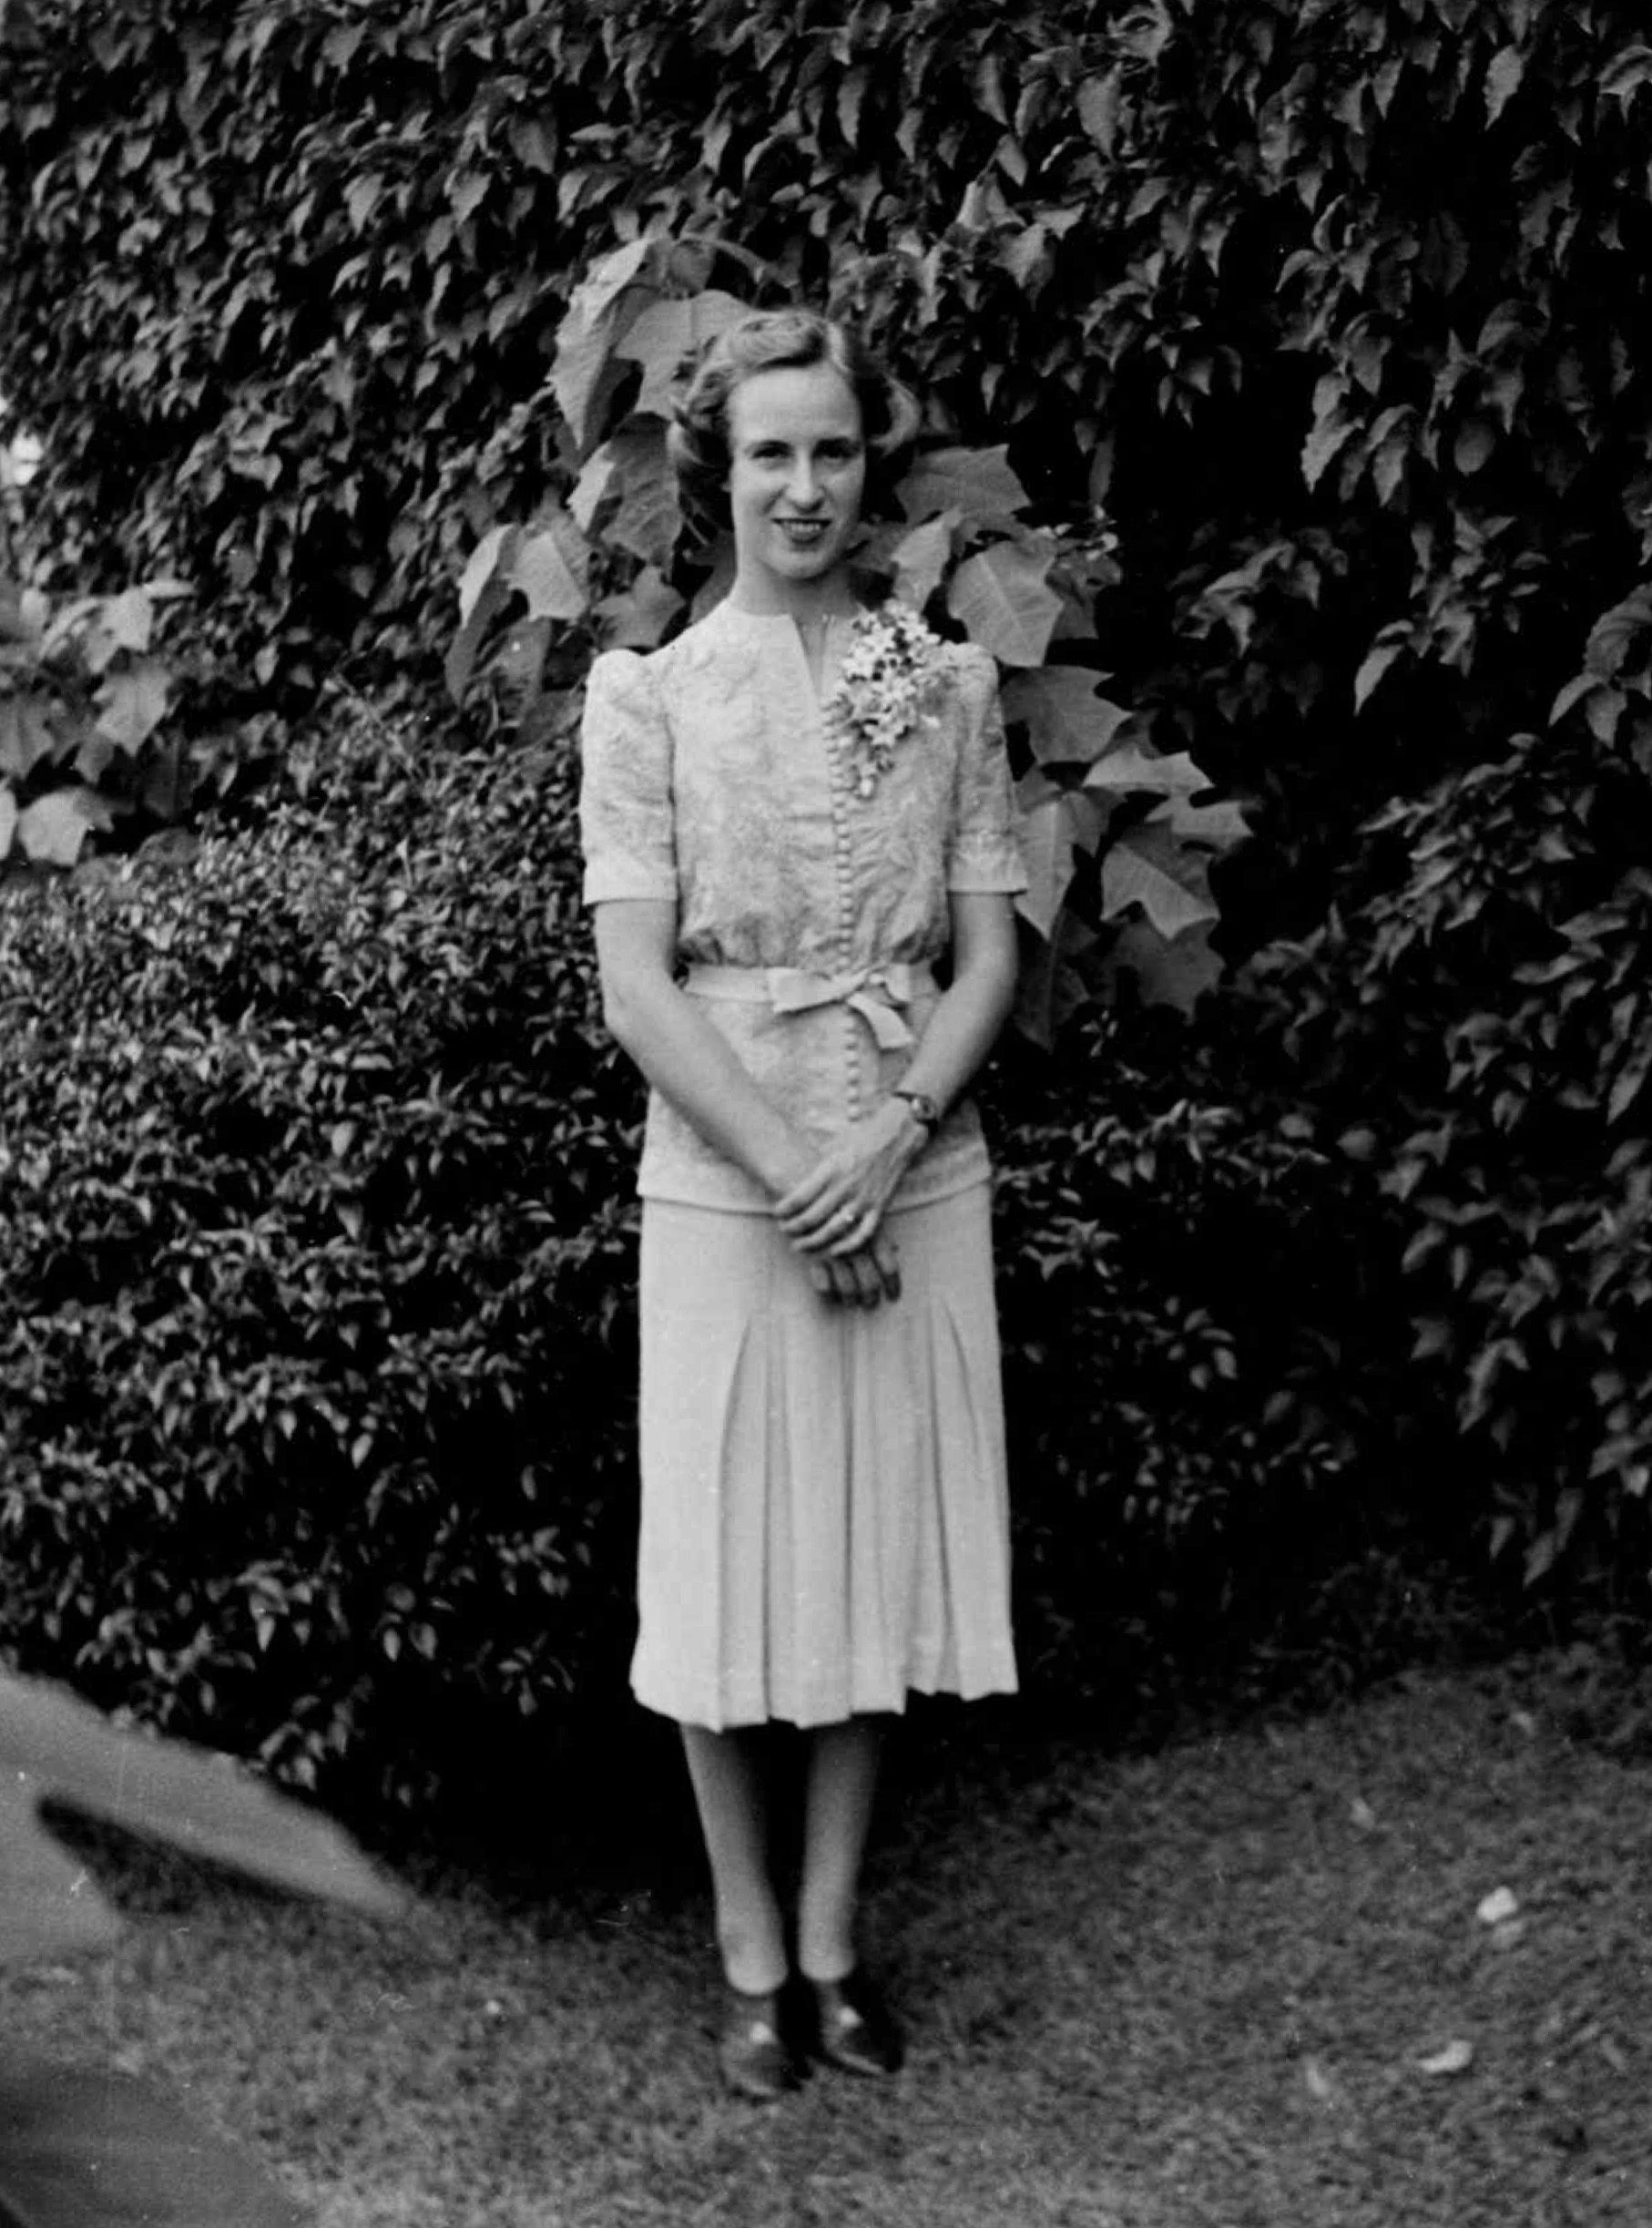 Alison Woodroffe on her wedding day in 1943